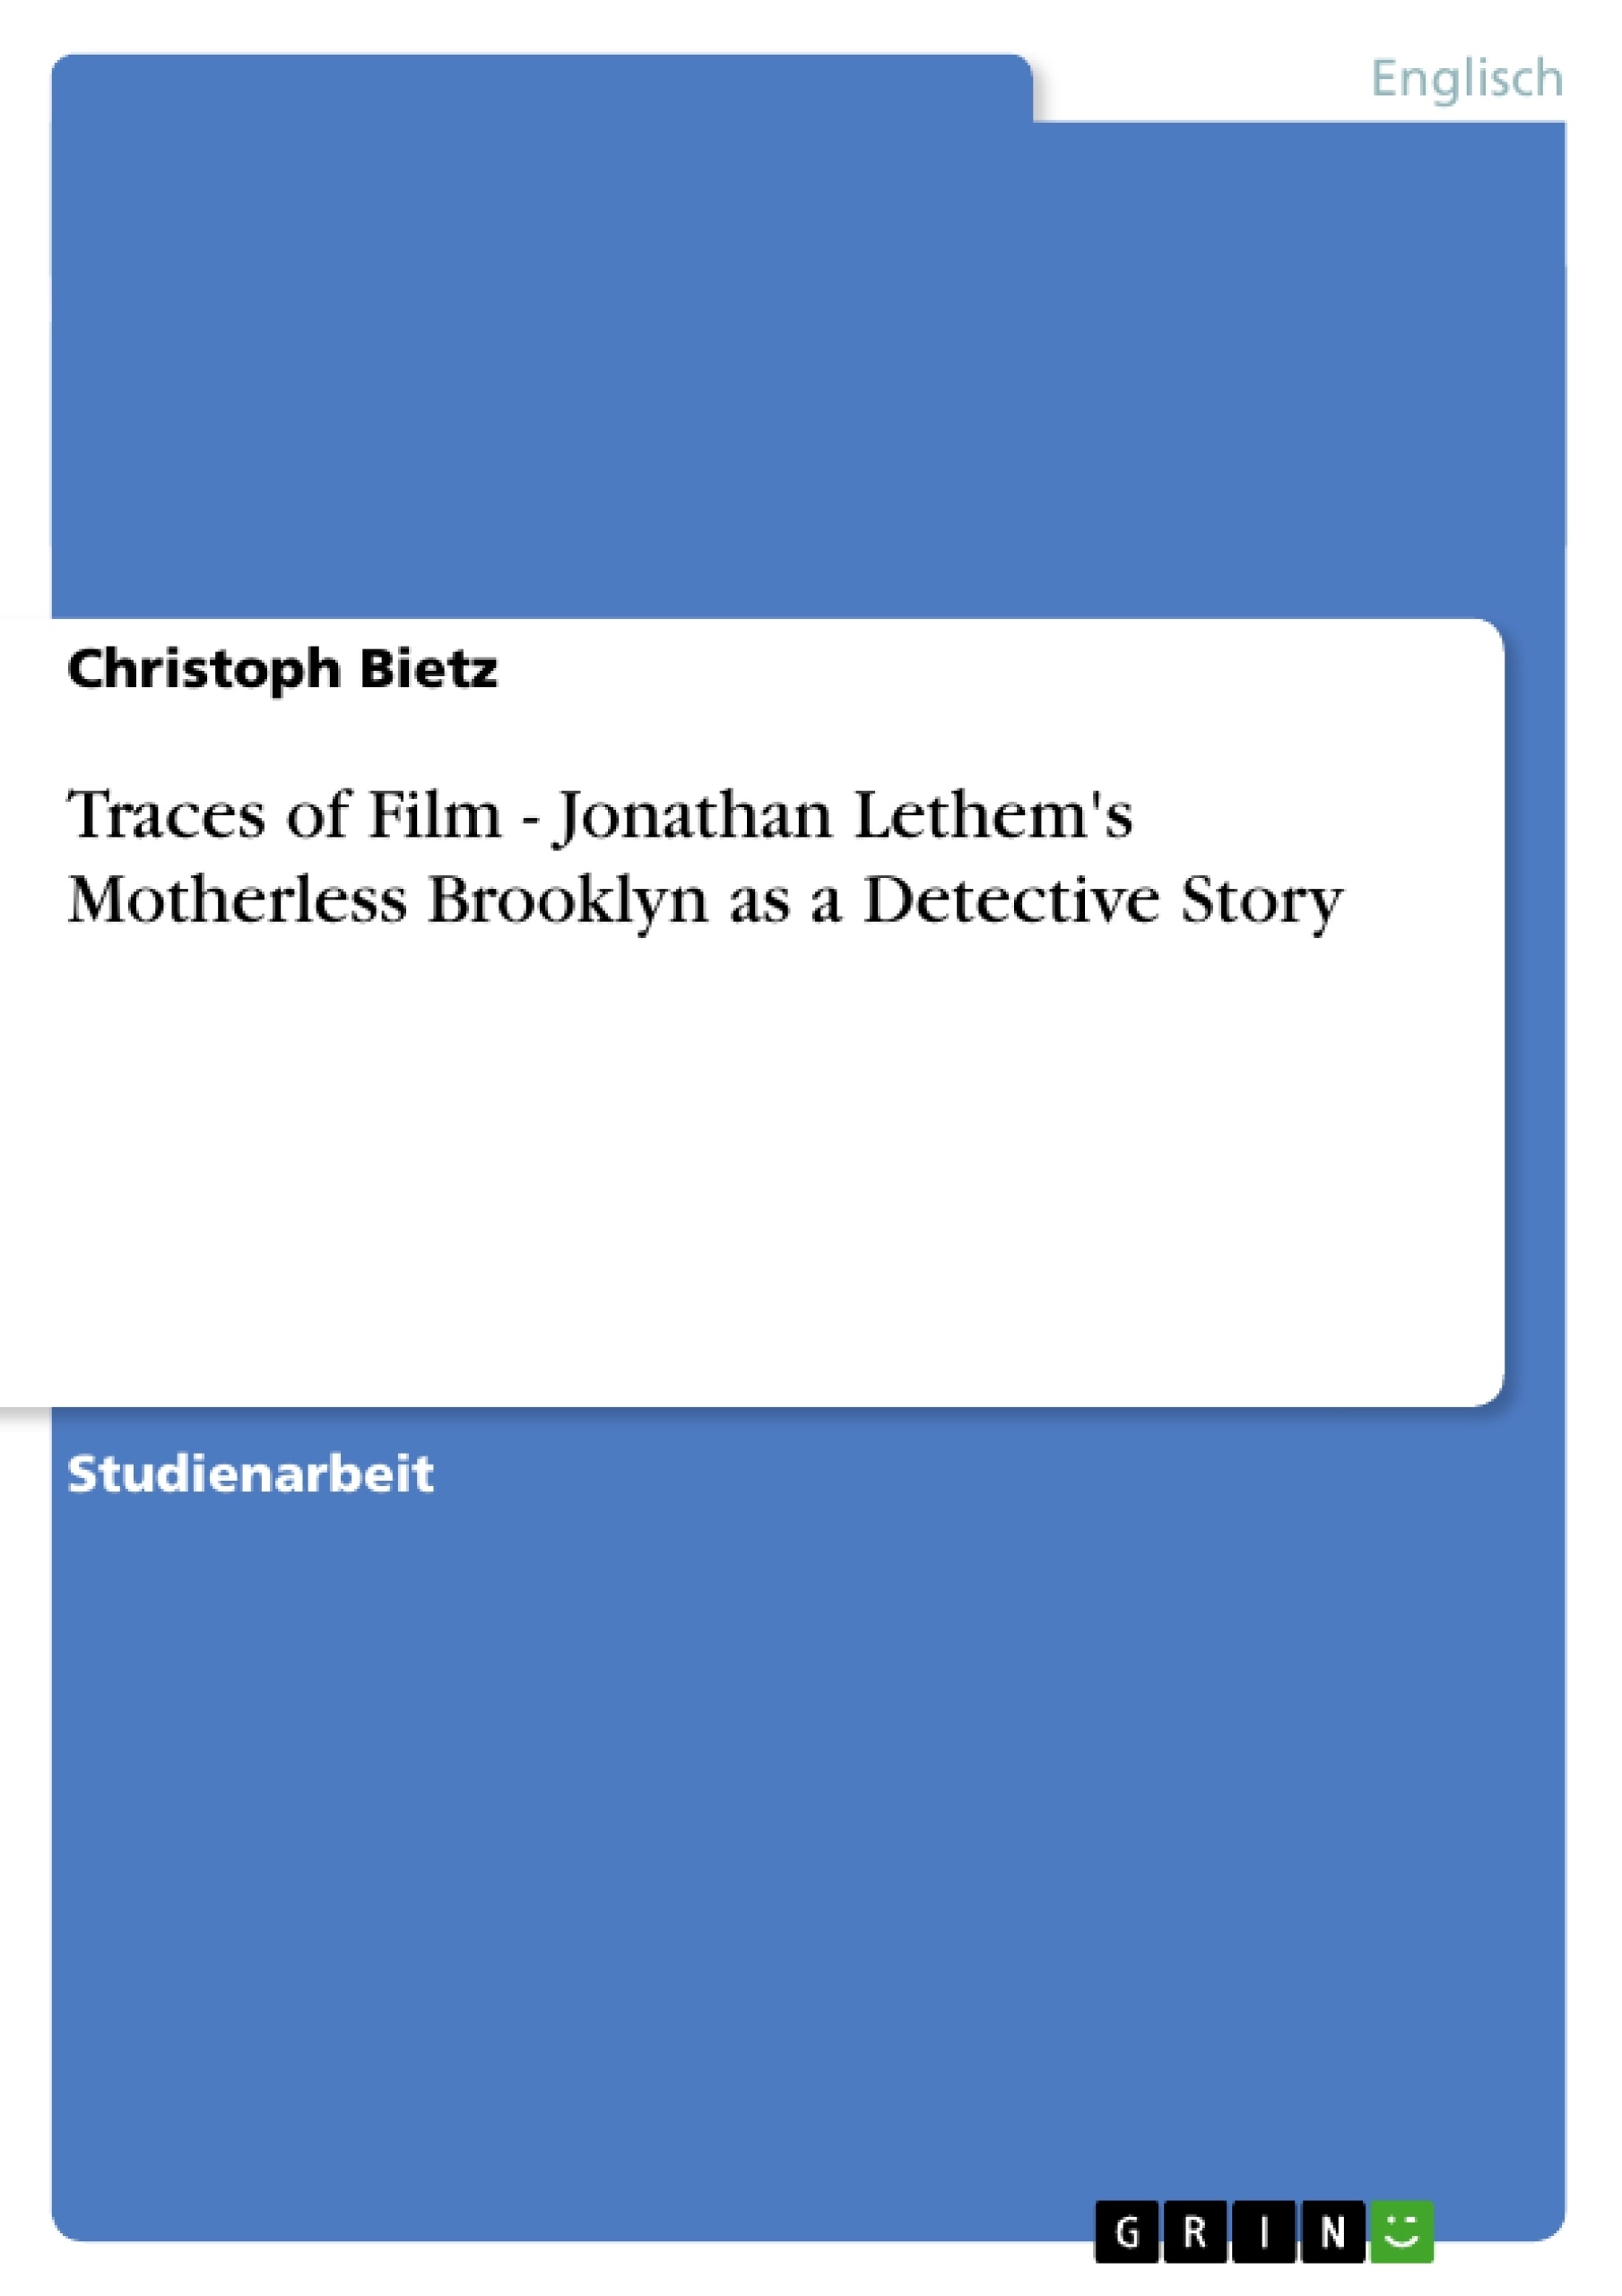 Título: Traces of Film - Jonathan Lethem's Motherless Brooklyn as a Detective Story